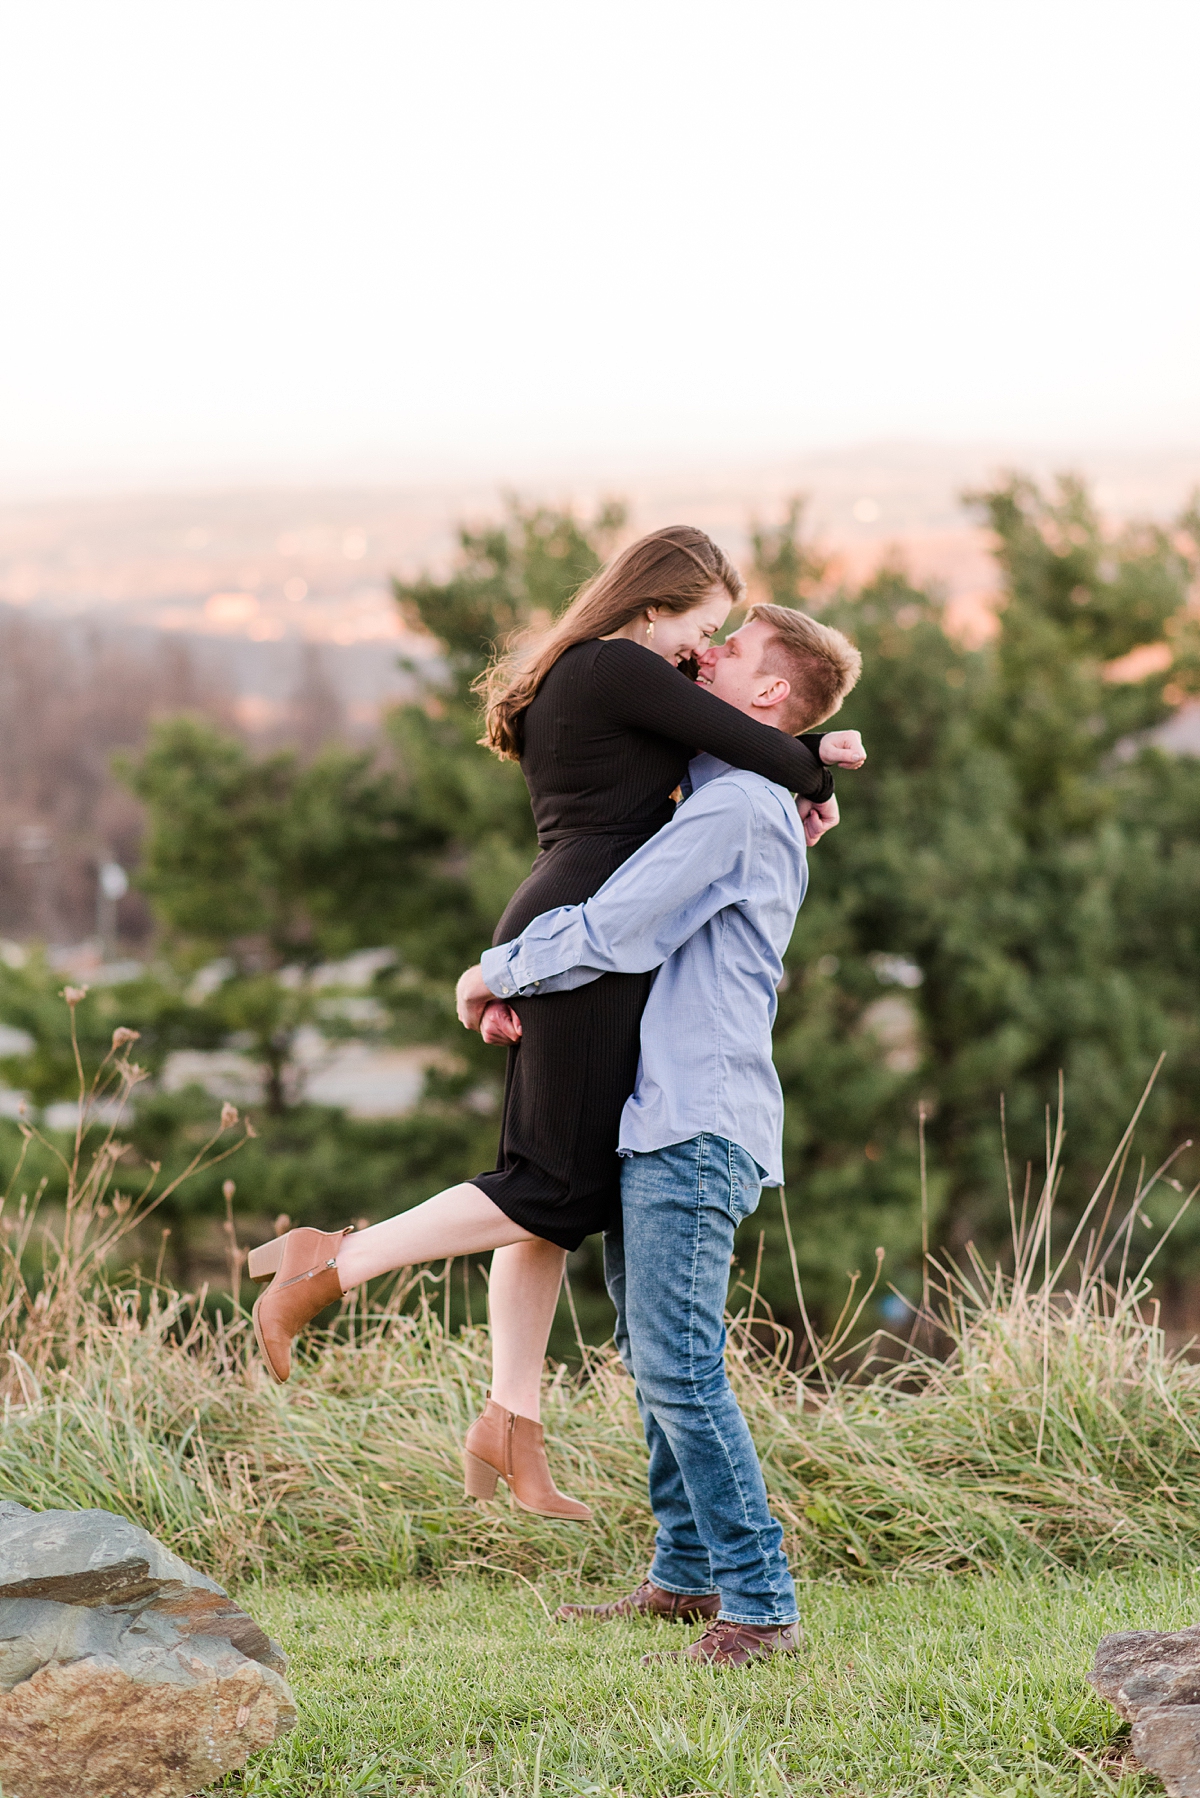 Scissor Kick Kiss with Mountain View at Fall Rockfish Gap Overlook Engagement Session. Photography by Richmond Wedding Photographer Kailey Brianne Photography.